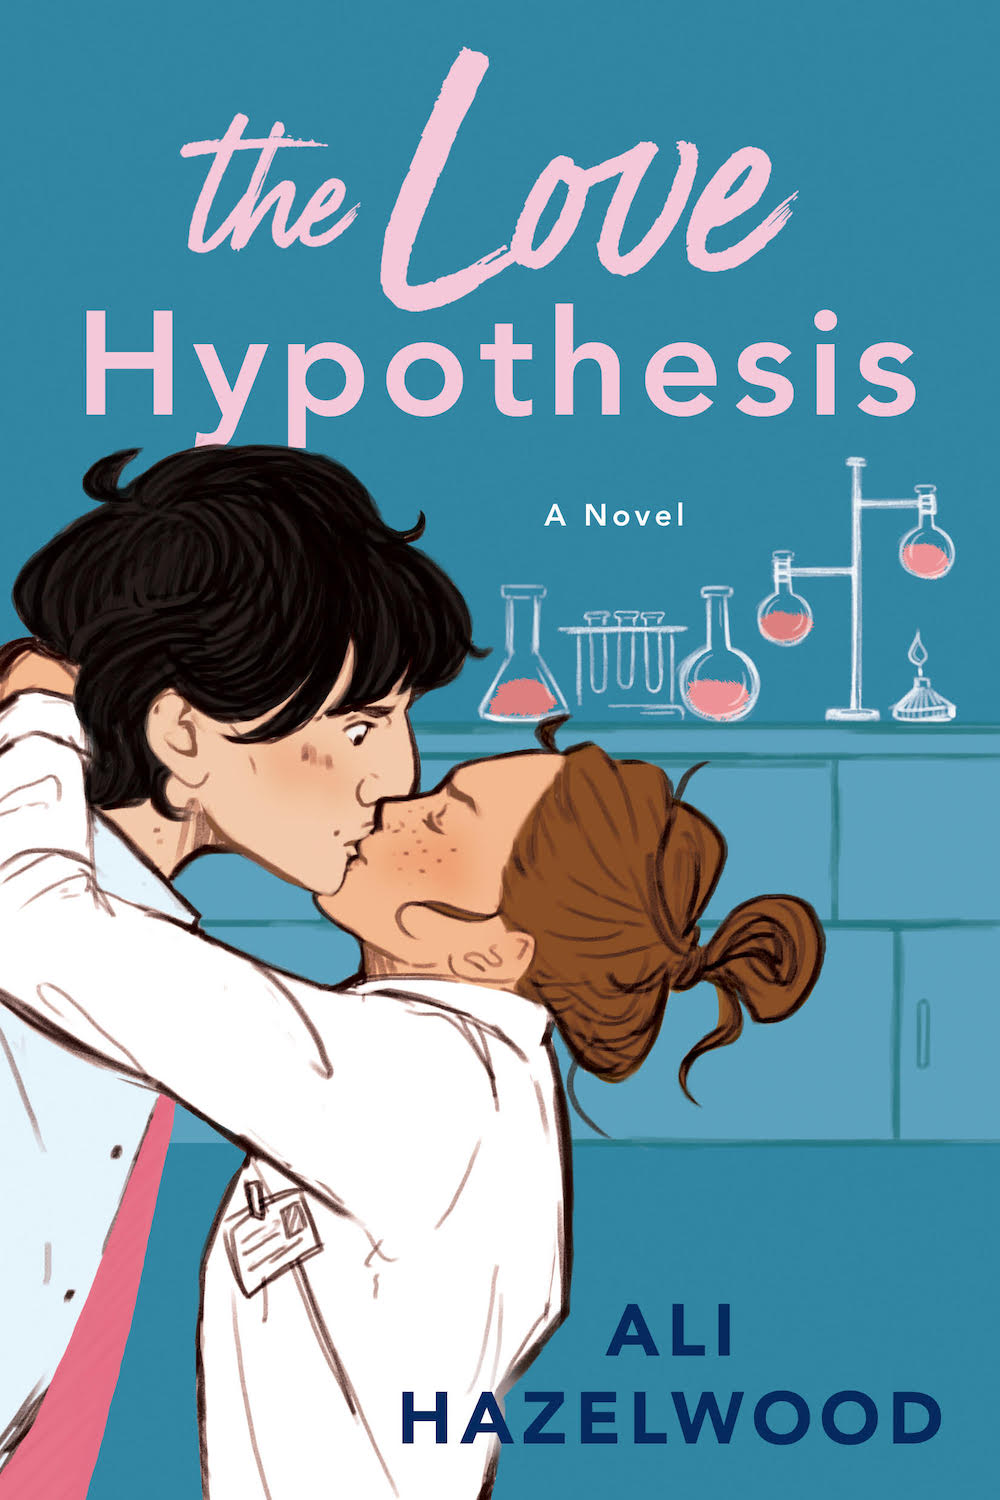 the love hypothesis goodreads questions